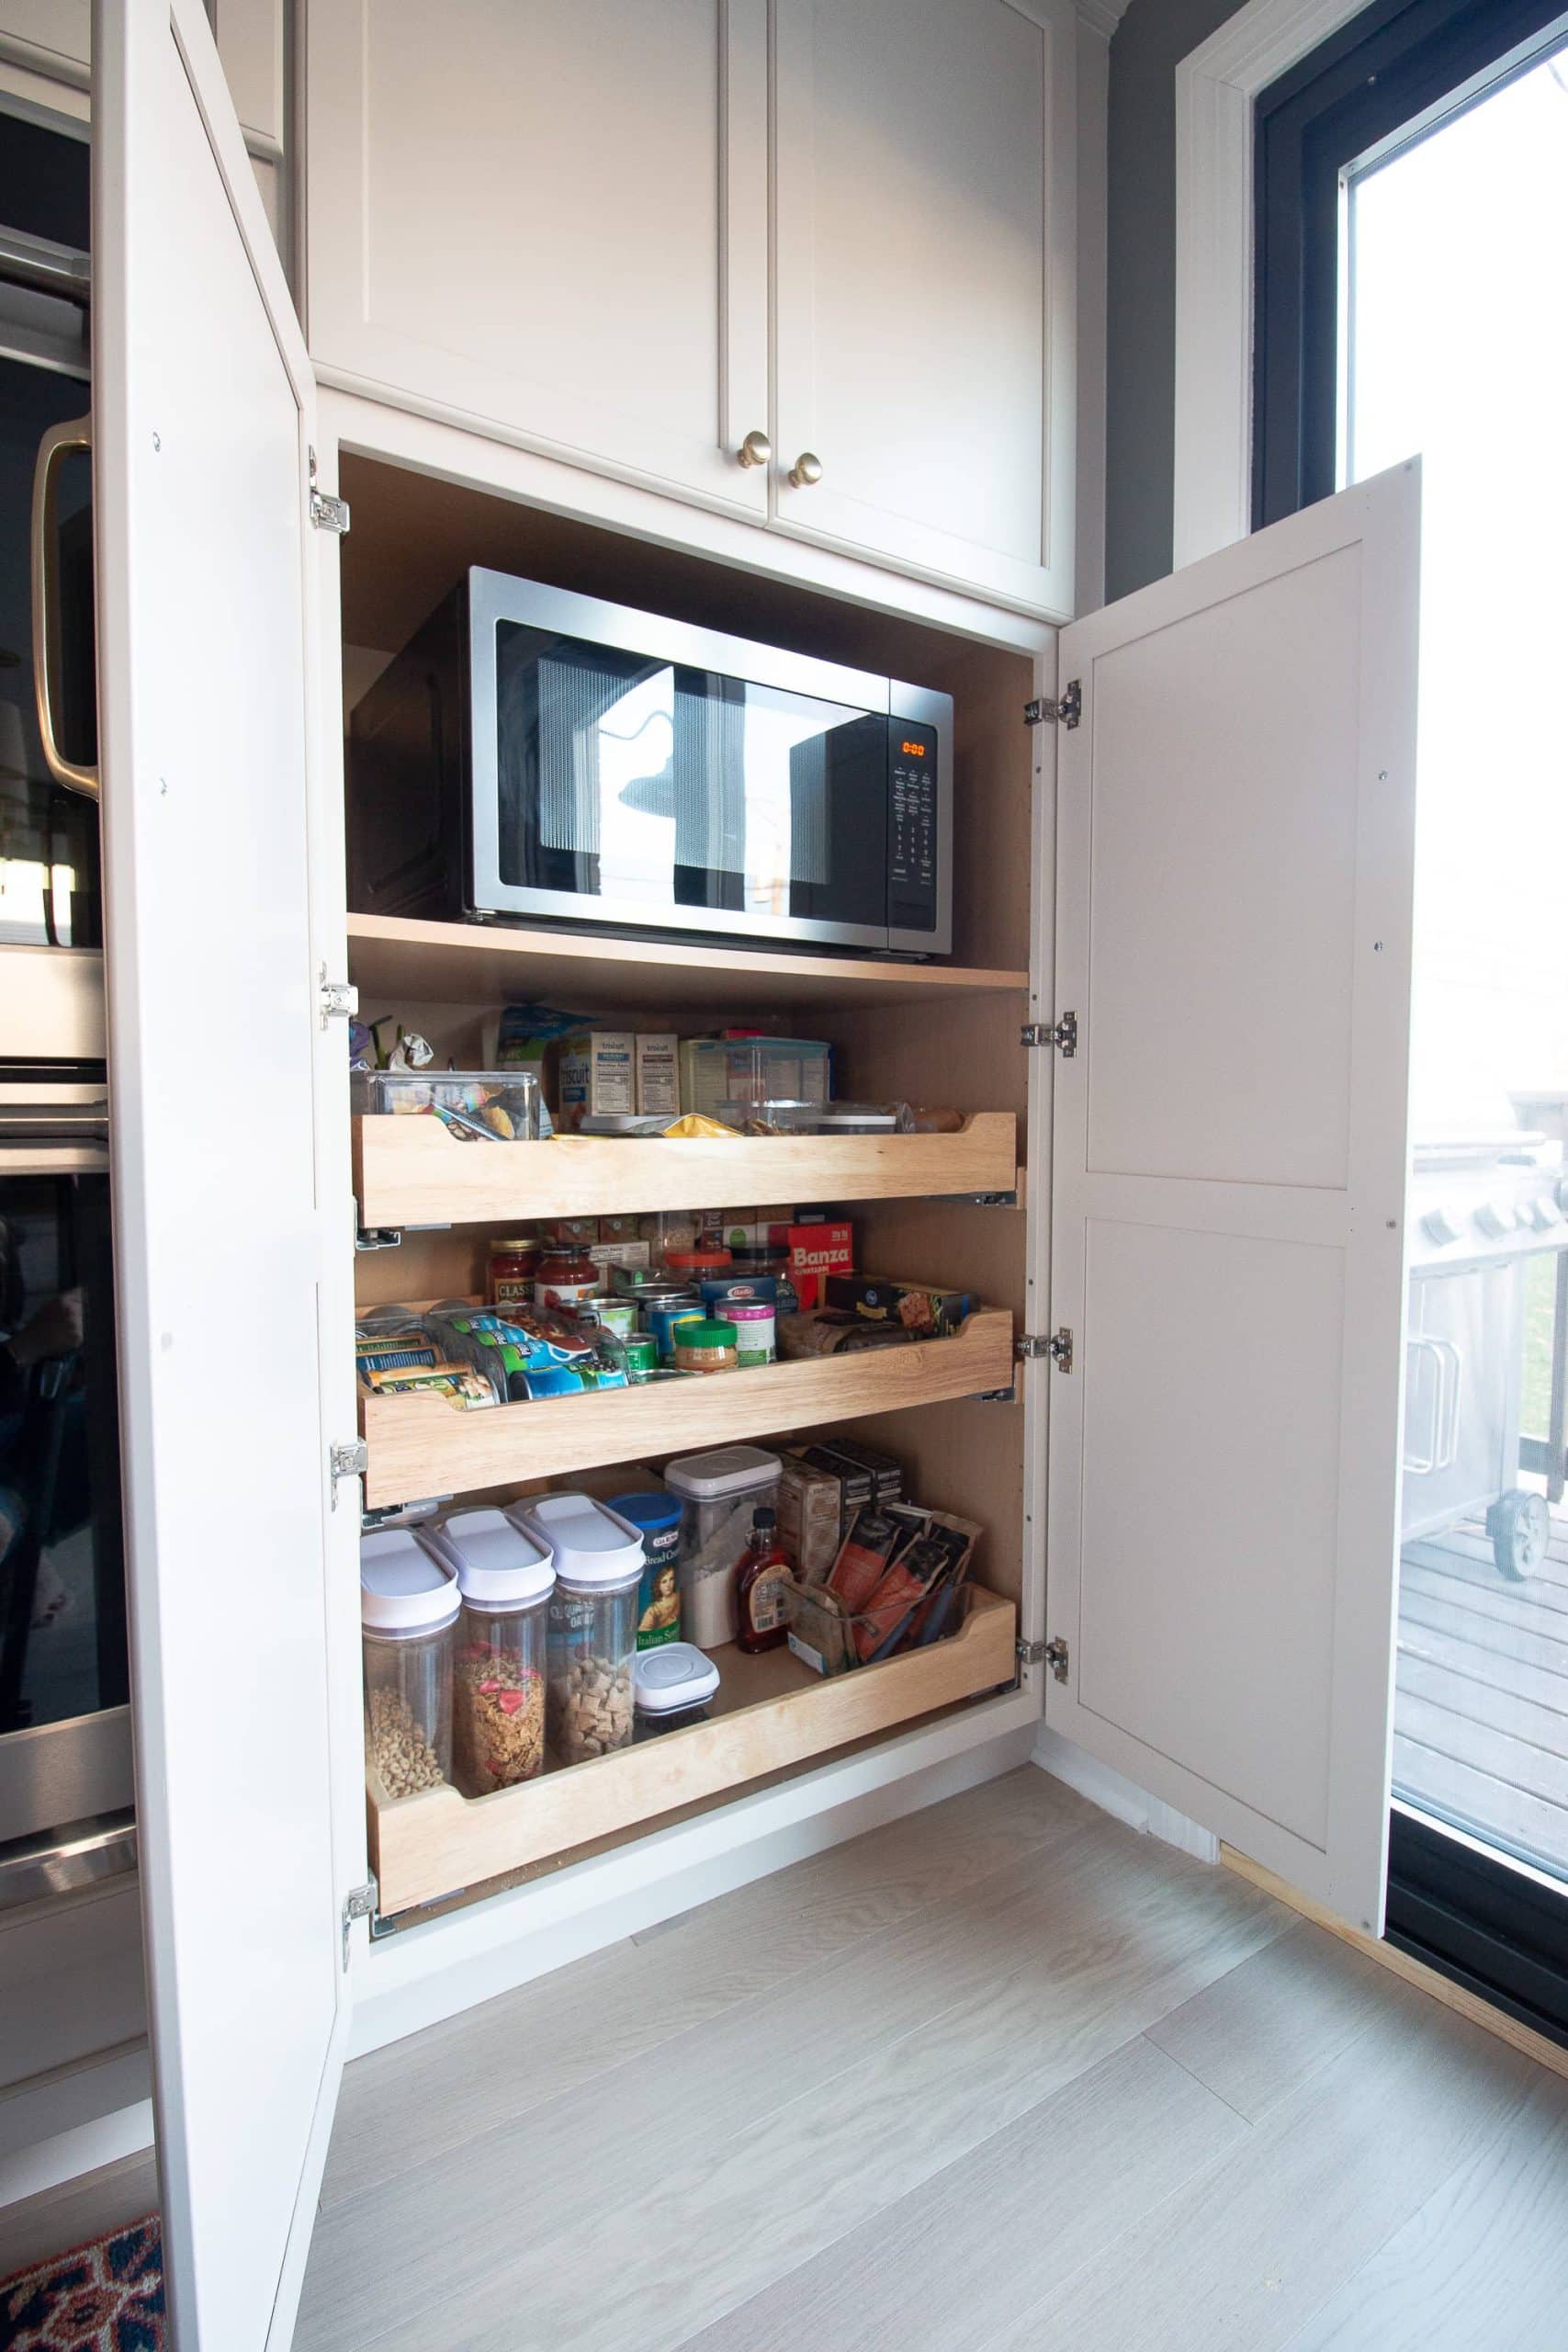 Tips to organize your pantry drawers